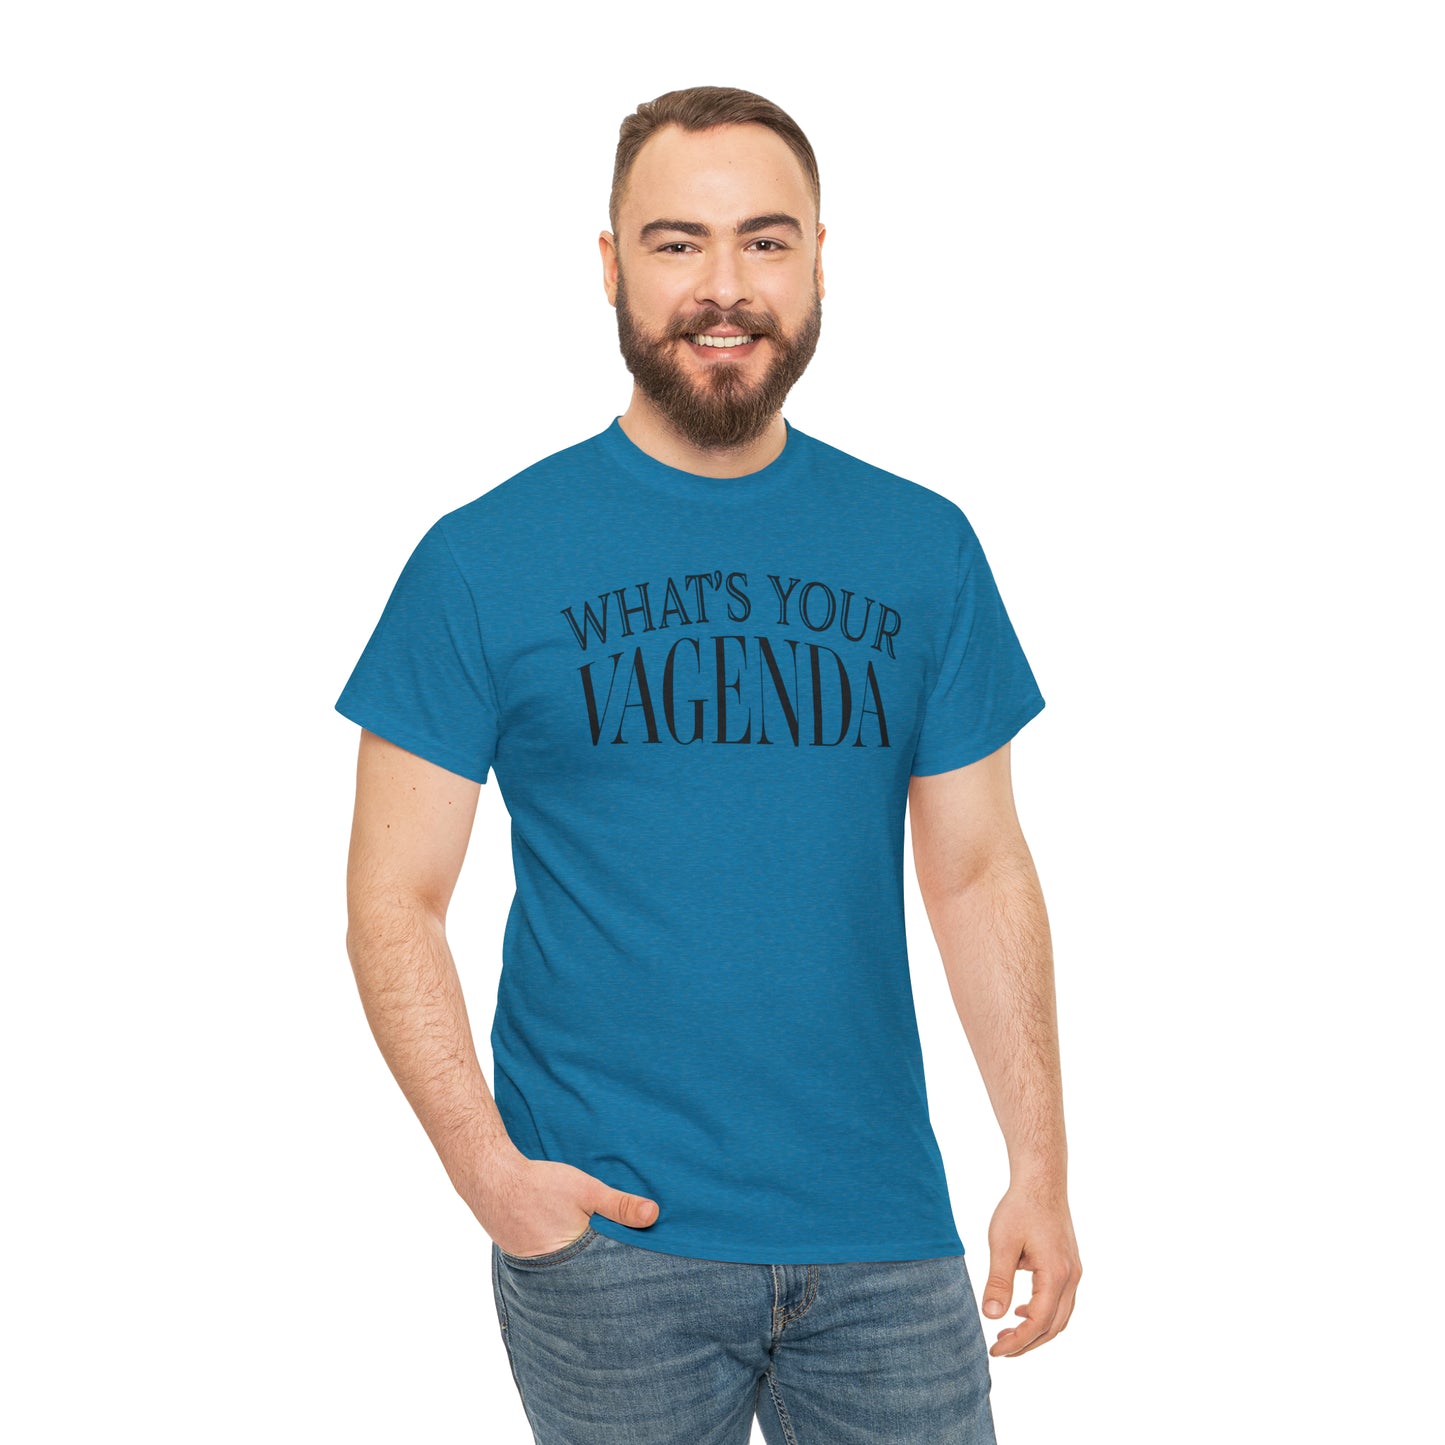 Funny Agenda T-Shirt For What's Your Vagenda TShirt  With Walterism T Shirt For Fringe Shirt For Sarcastic Scheme T-Shirt